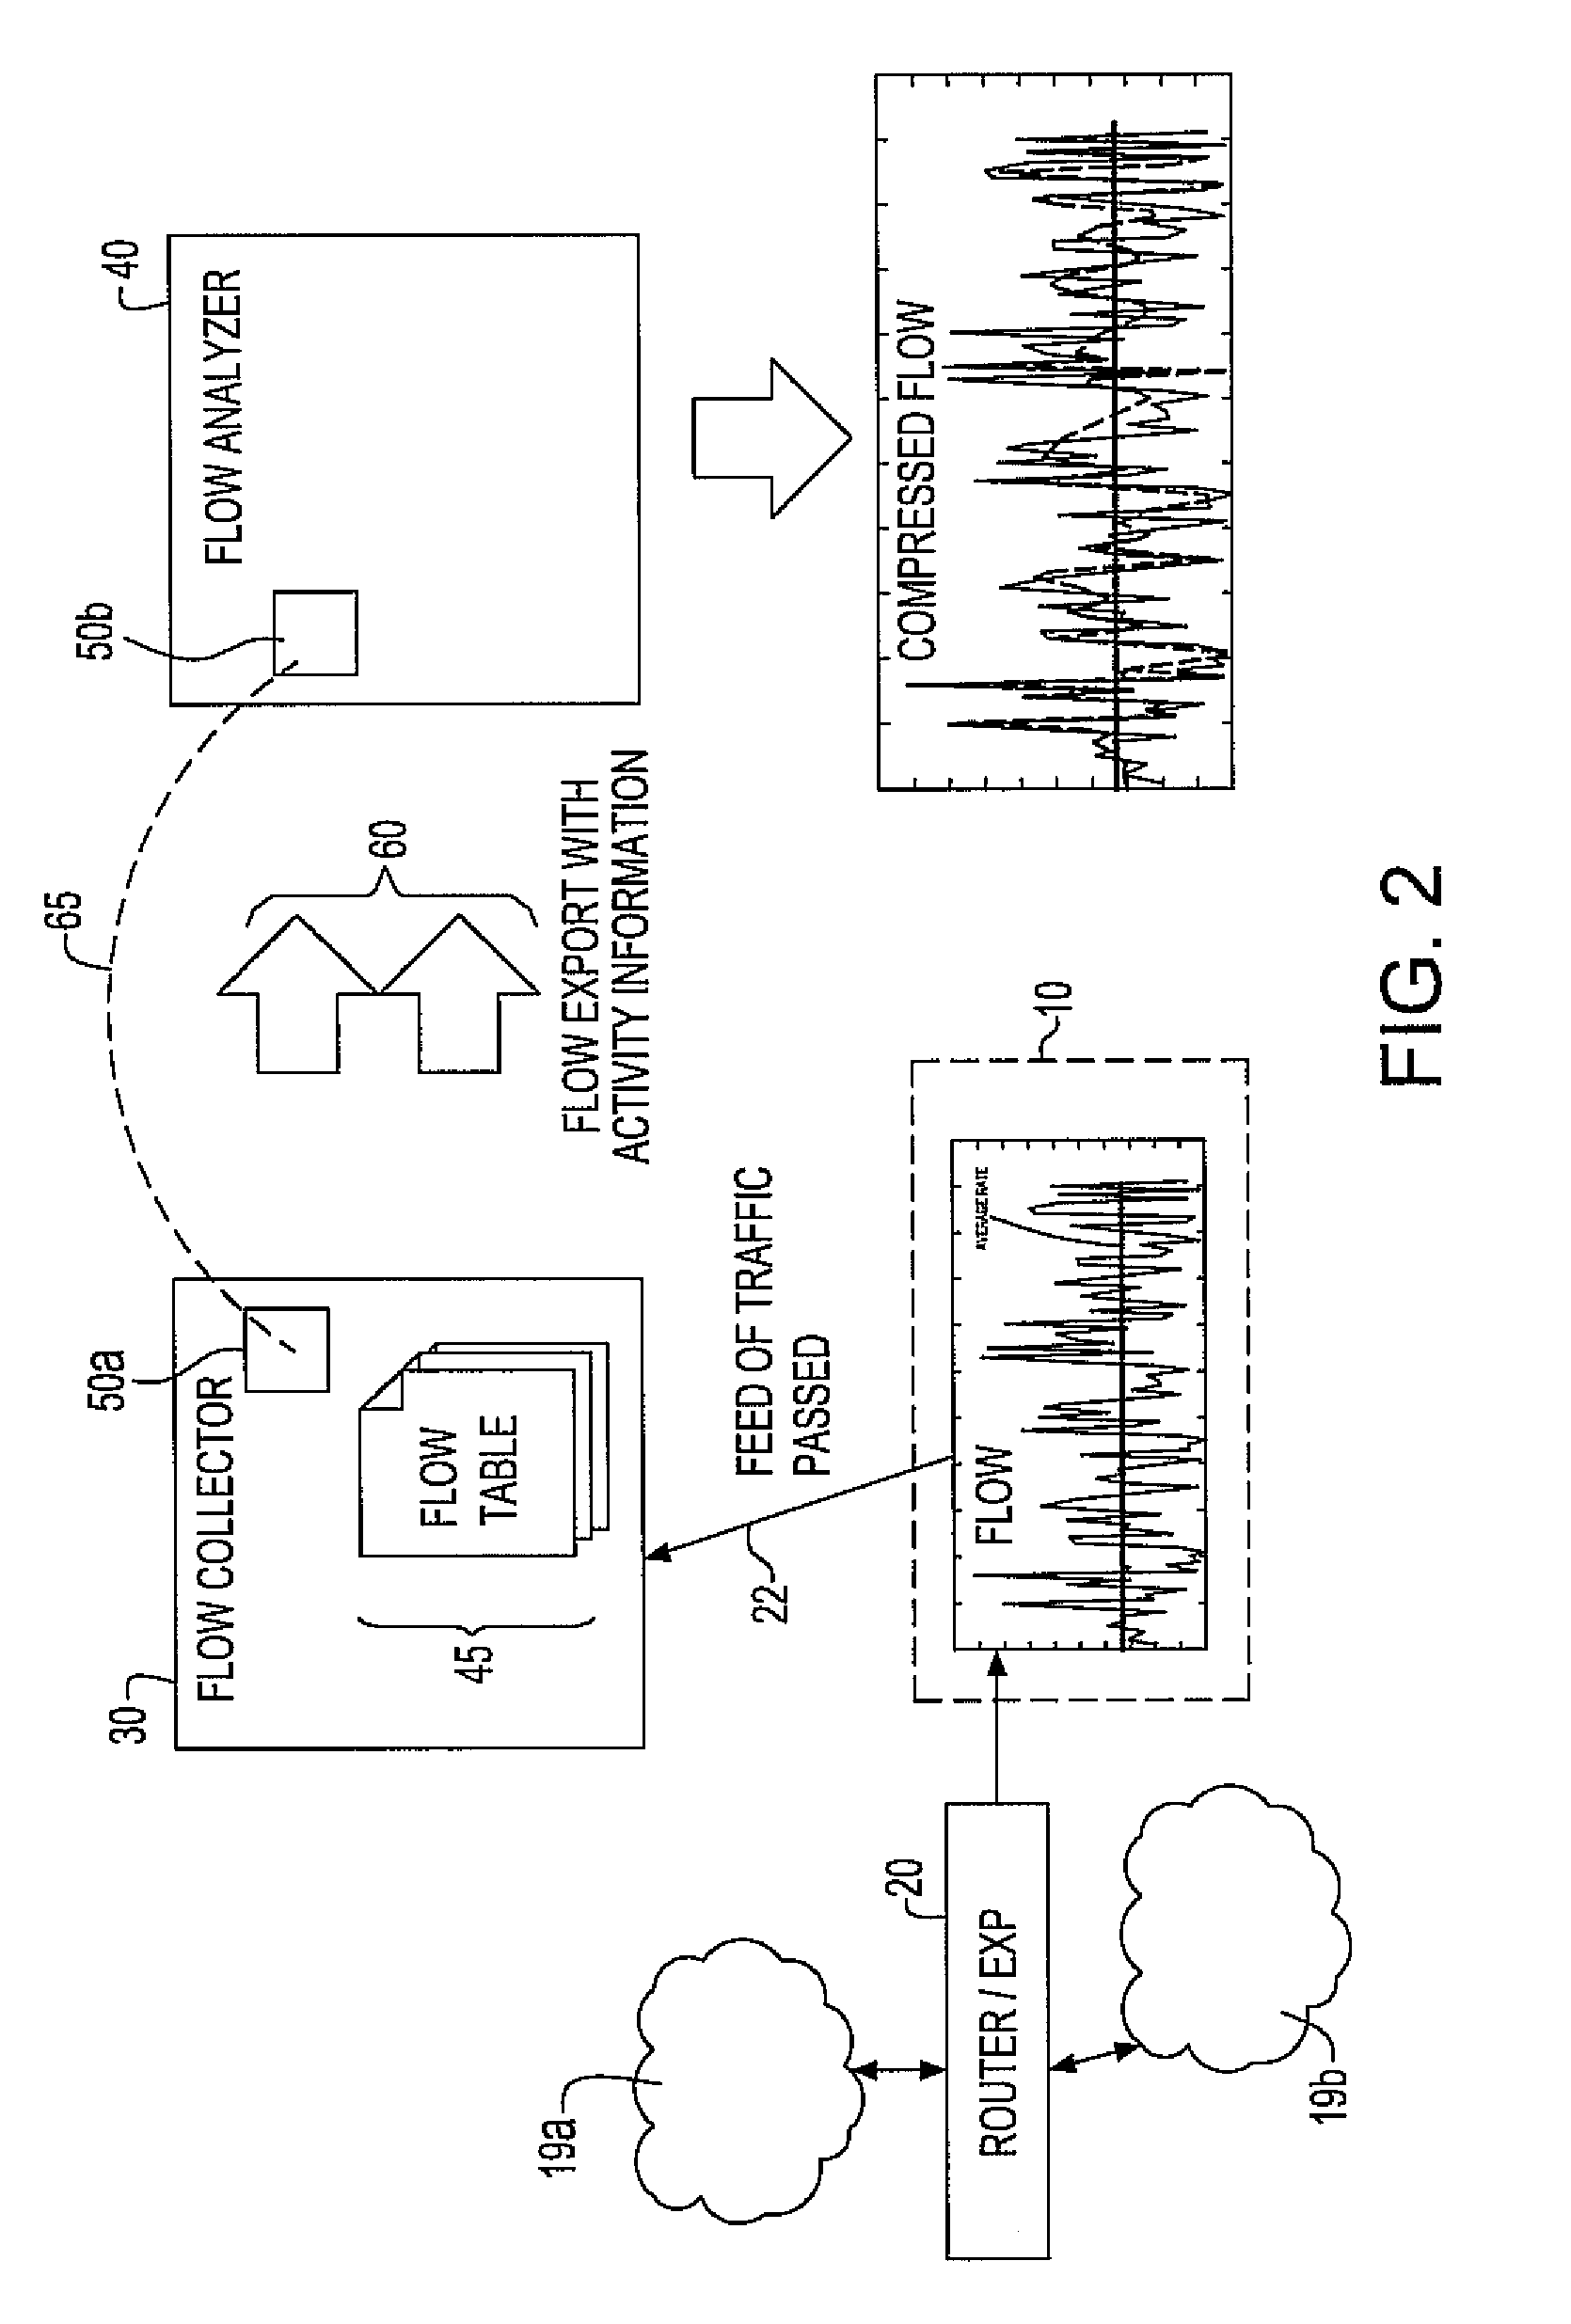 System and method for network flow traffic rate encoding